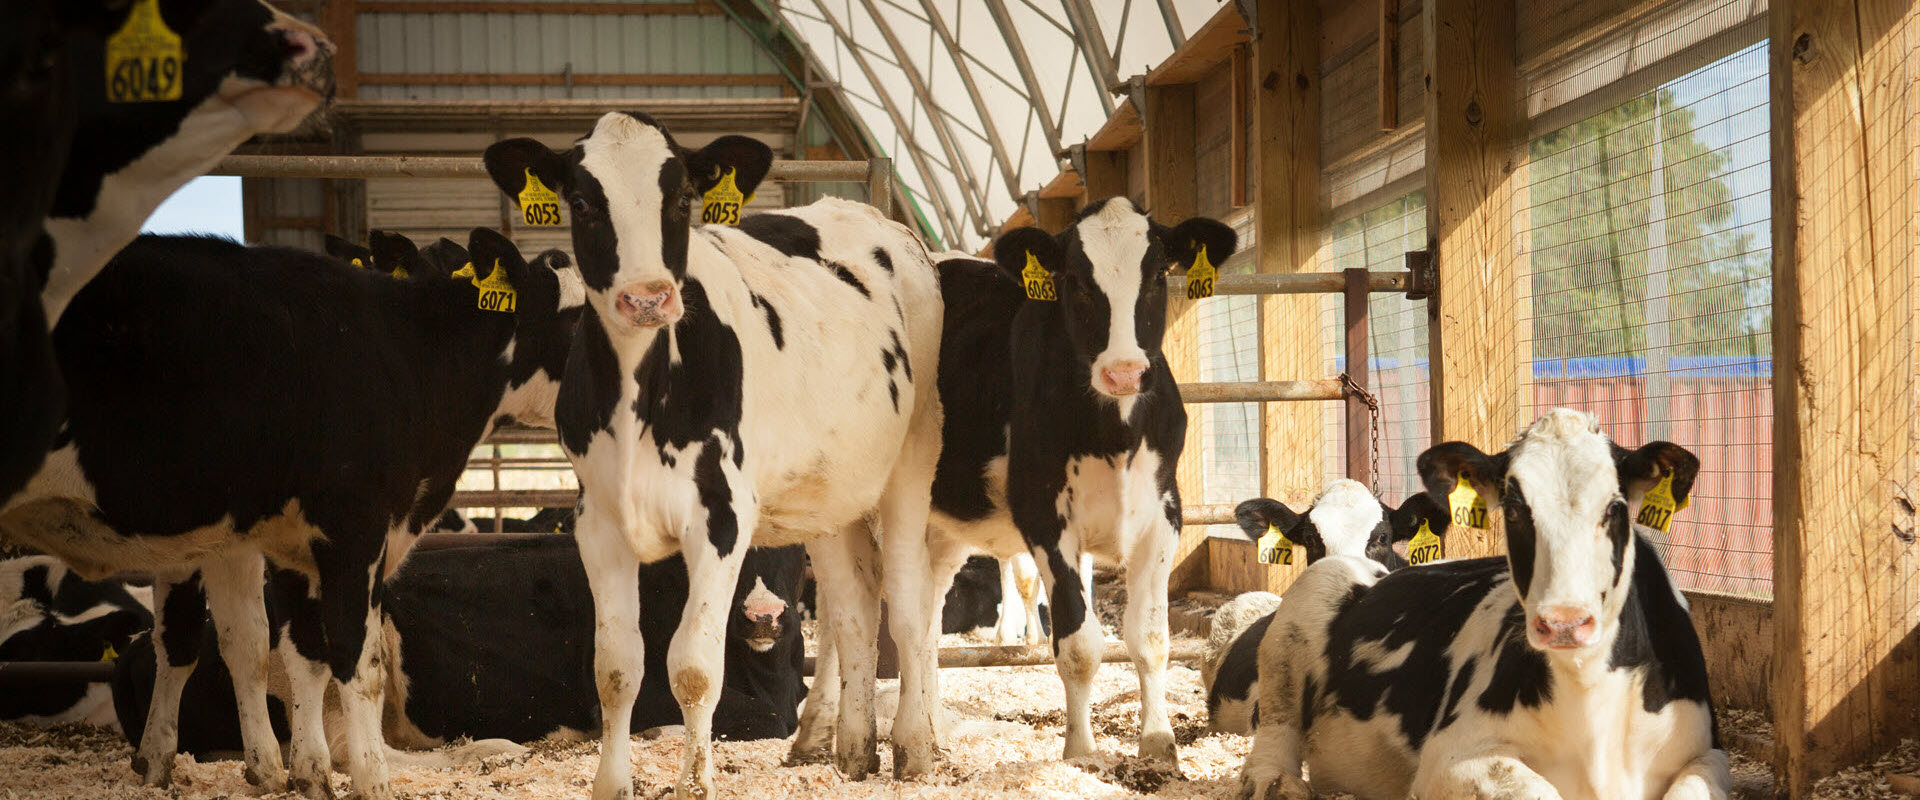 Dairy Cattle and Livestock in a barn